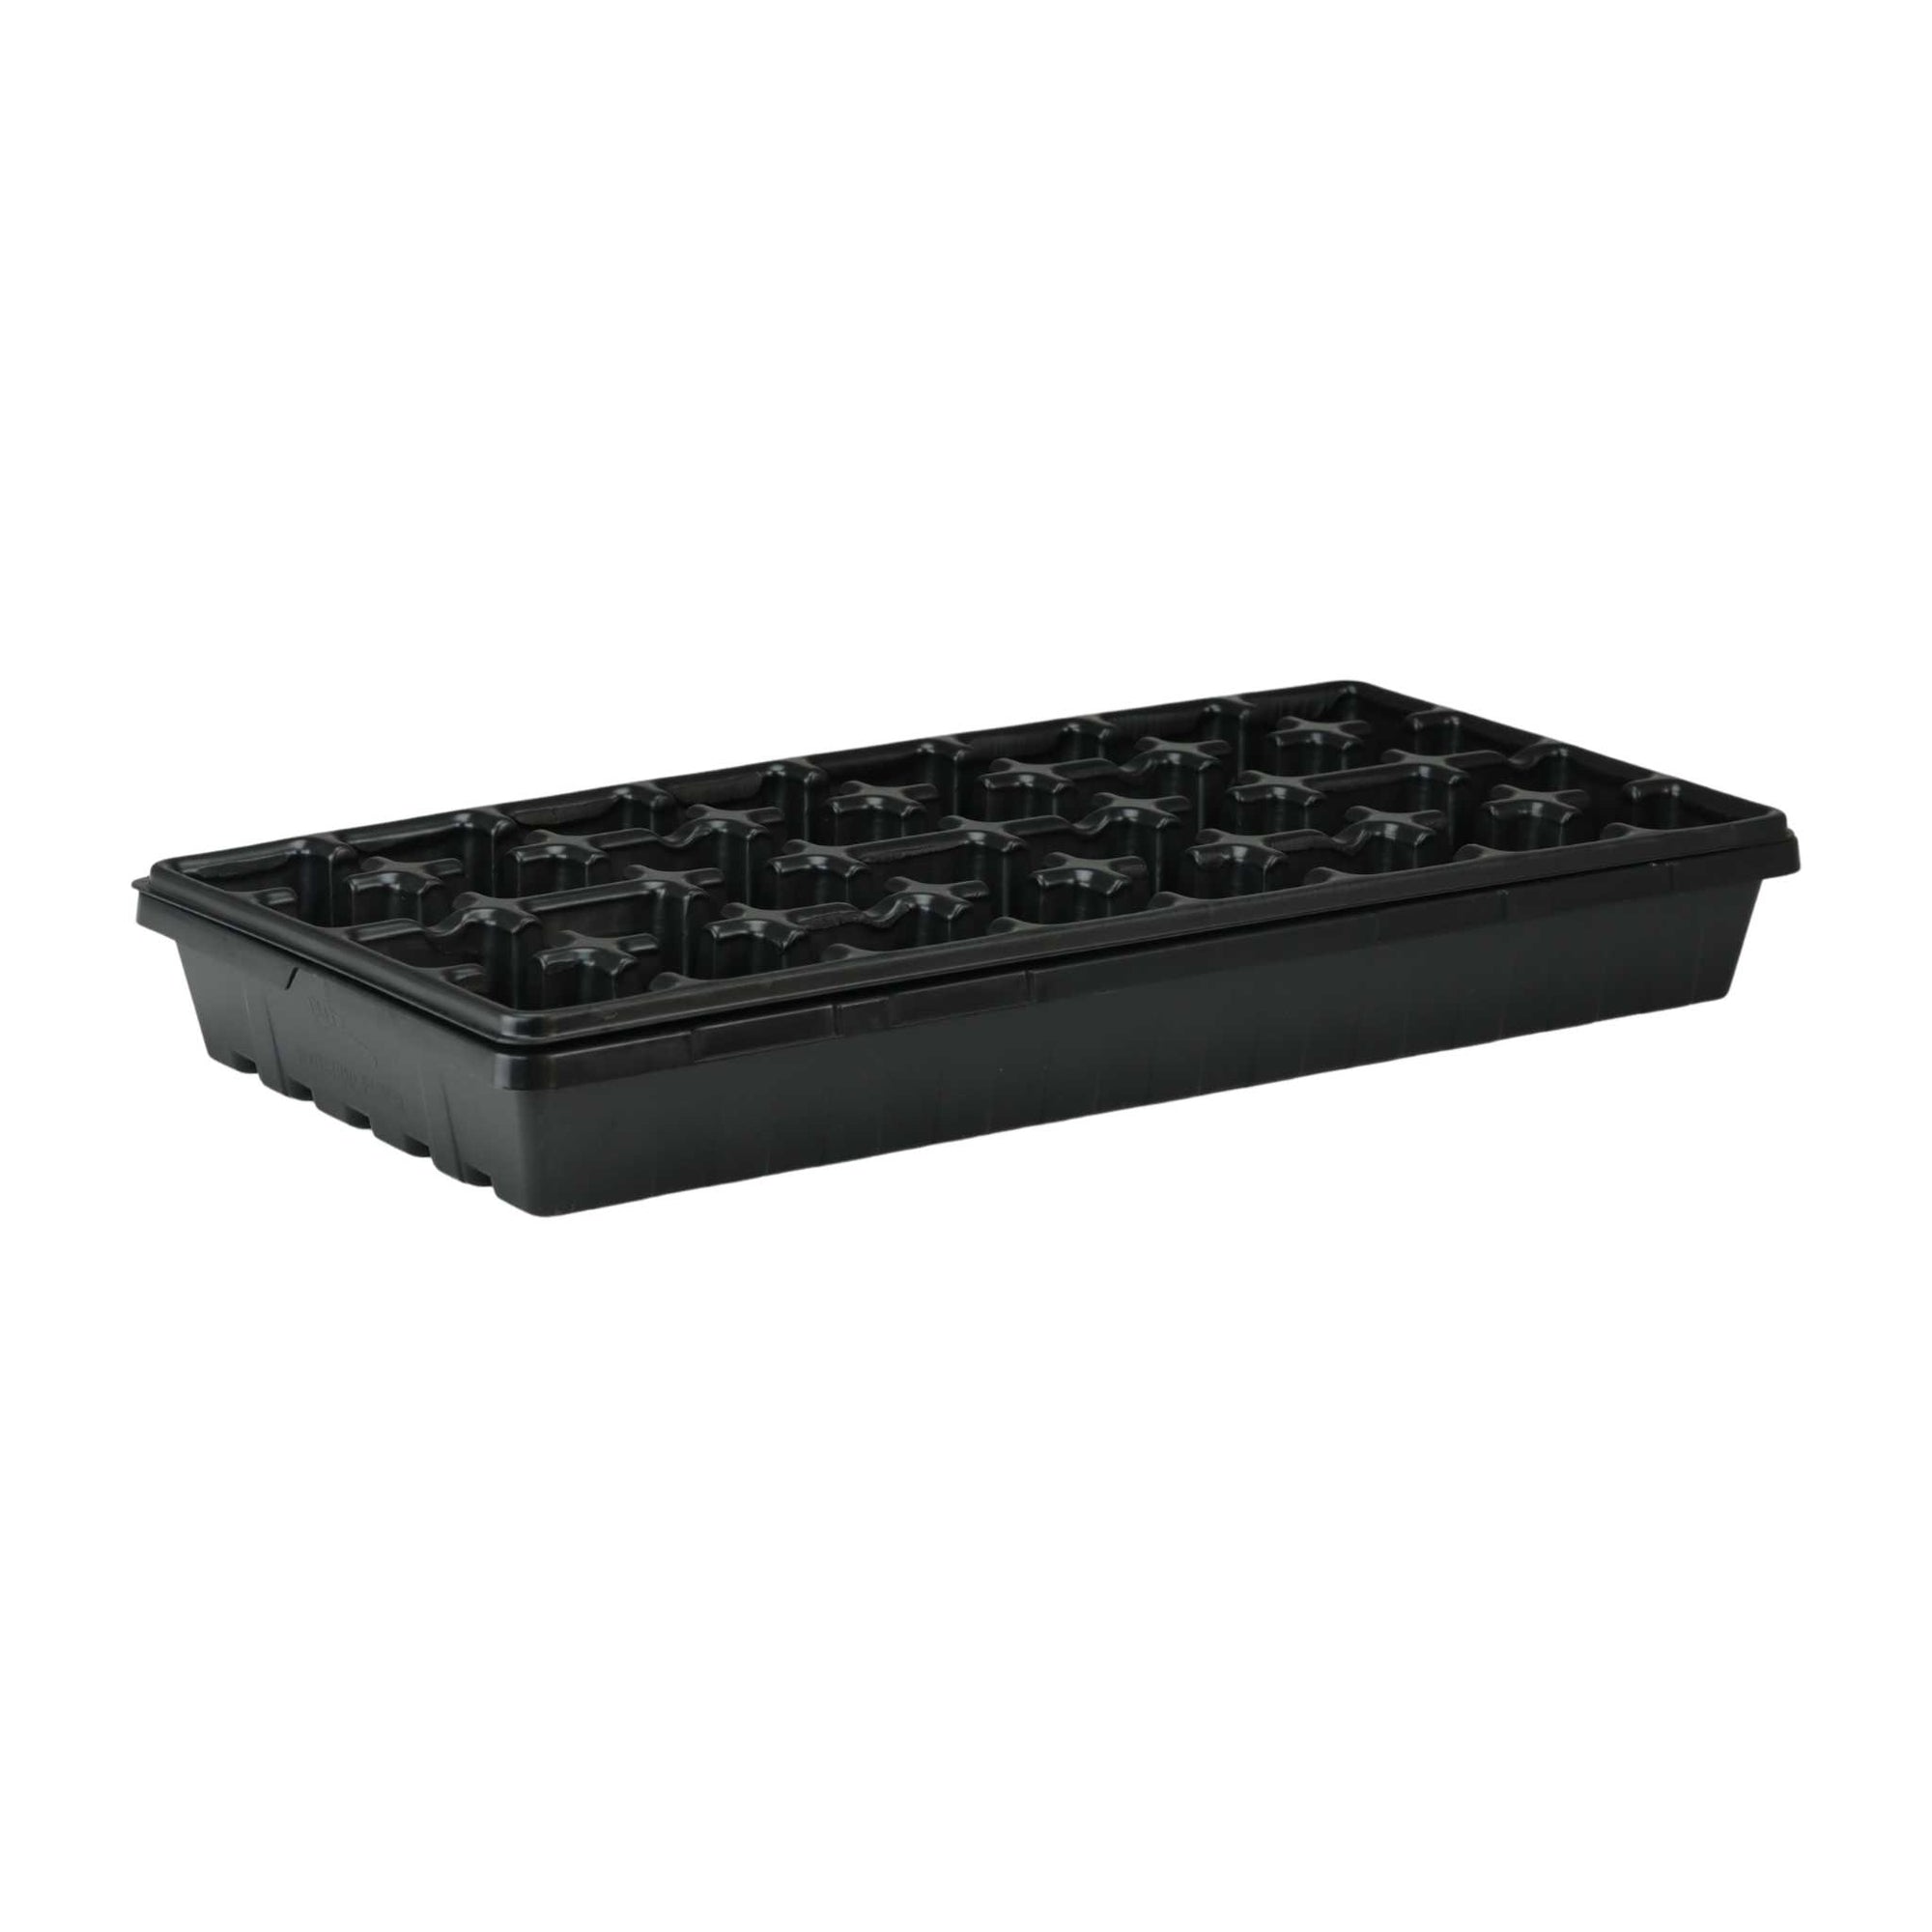 32 cell in 1020 deep black tray